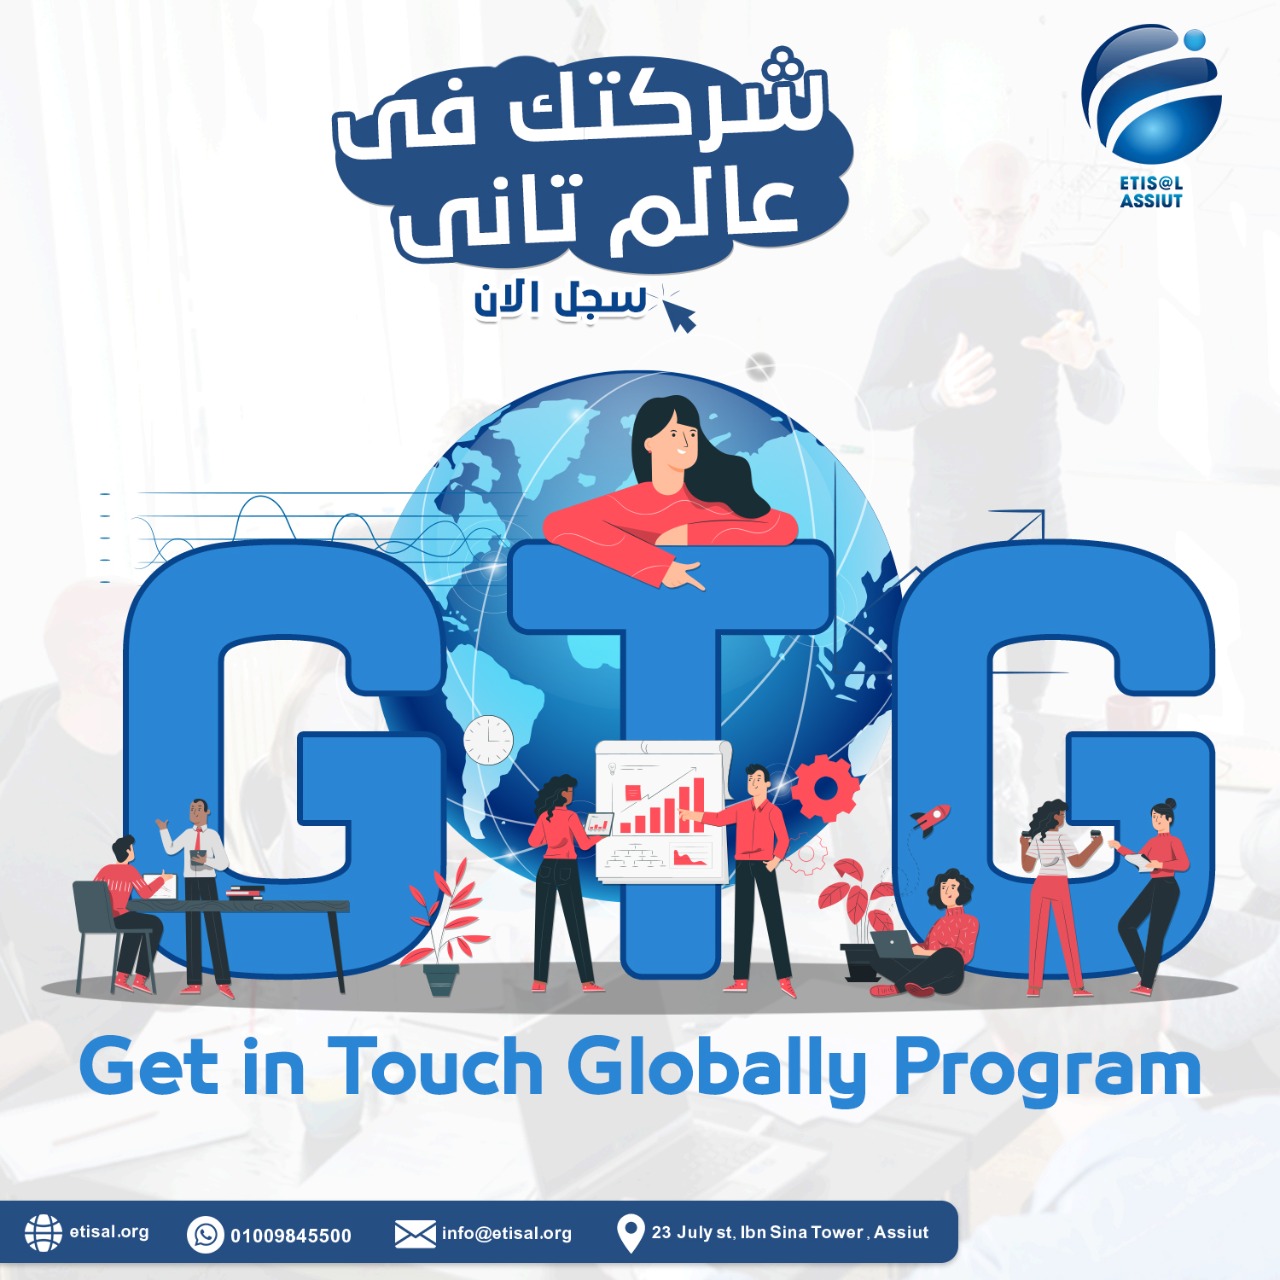 Get in Touch Globally Program